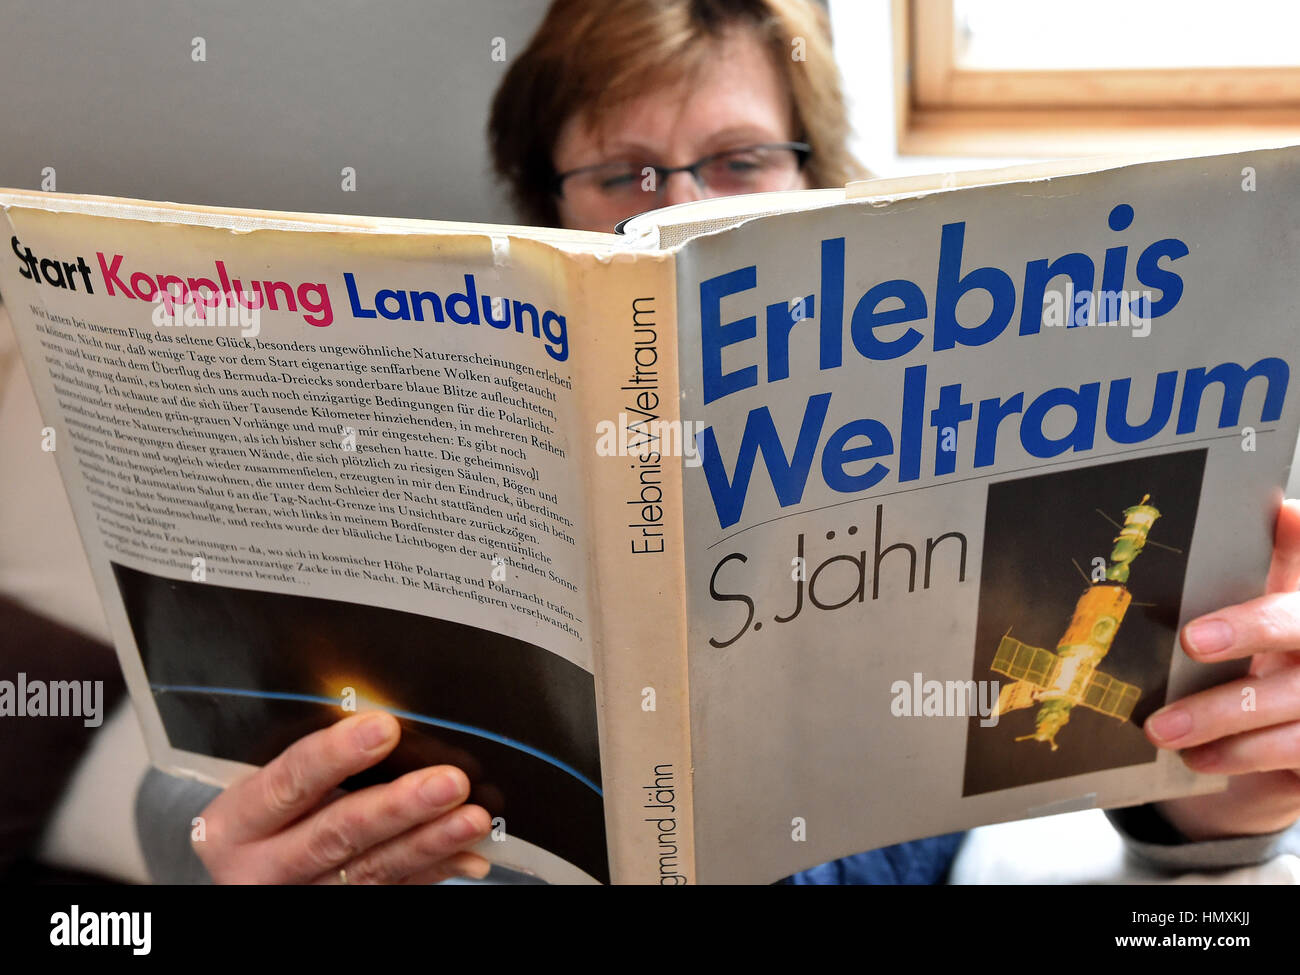 Berlin, Germany. 6th Feb, 2017. ILLUSTRATION - A woman reads the first edition of the book 'Erlebnis Weltraum' (lit. 'Experience of Space') from Sigmund Jaehn in Berlin, Germany, 6 February 2017. It was published by Militaer publishing in the GDR in 1983. Credit: dpa/Alamy Live News Stock Photo